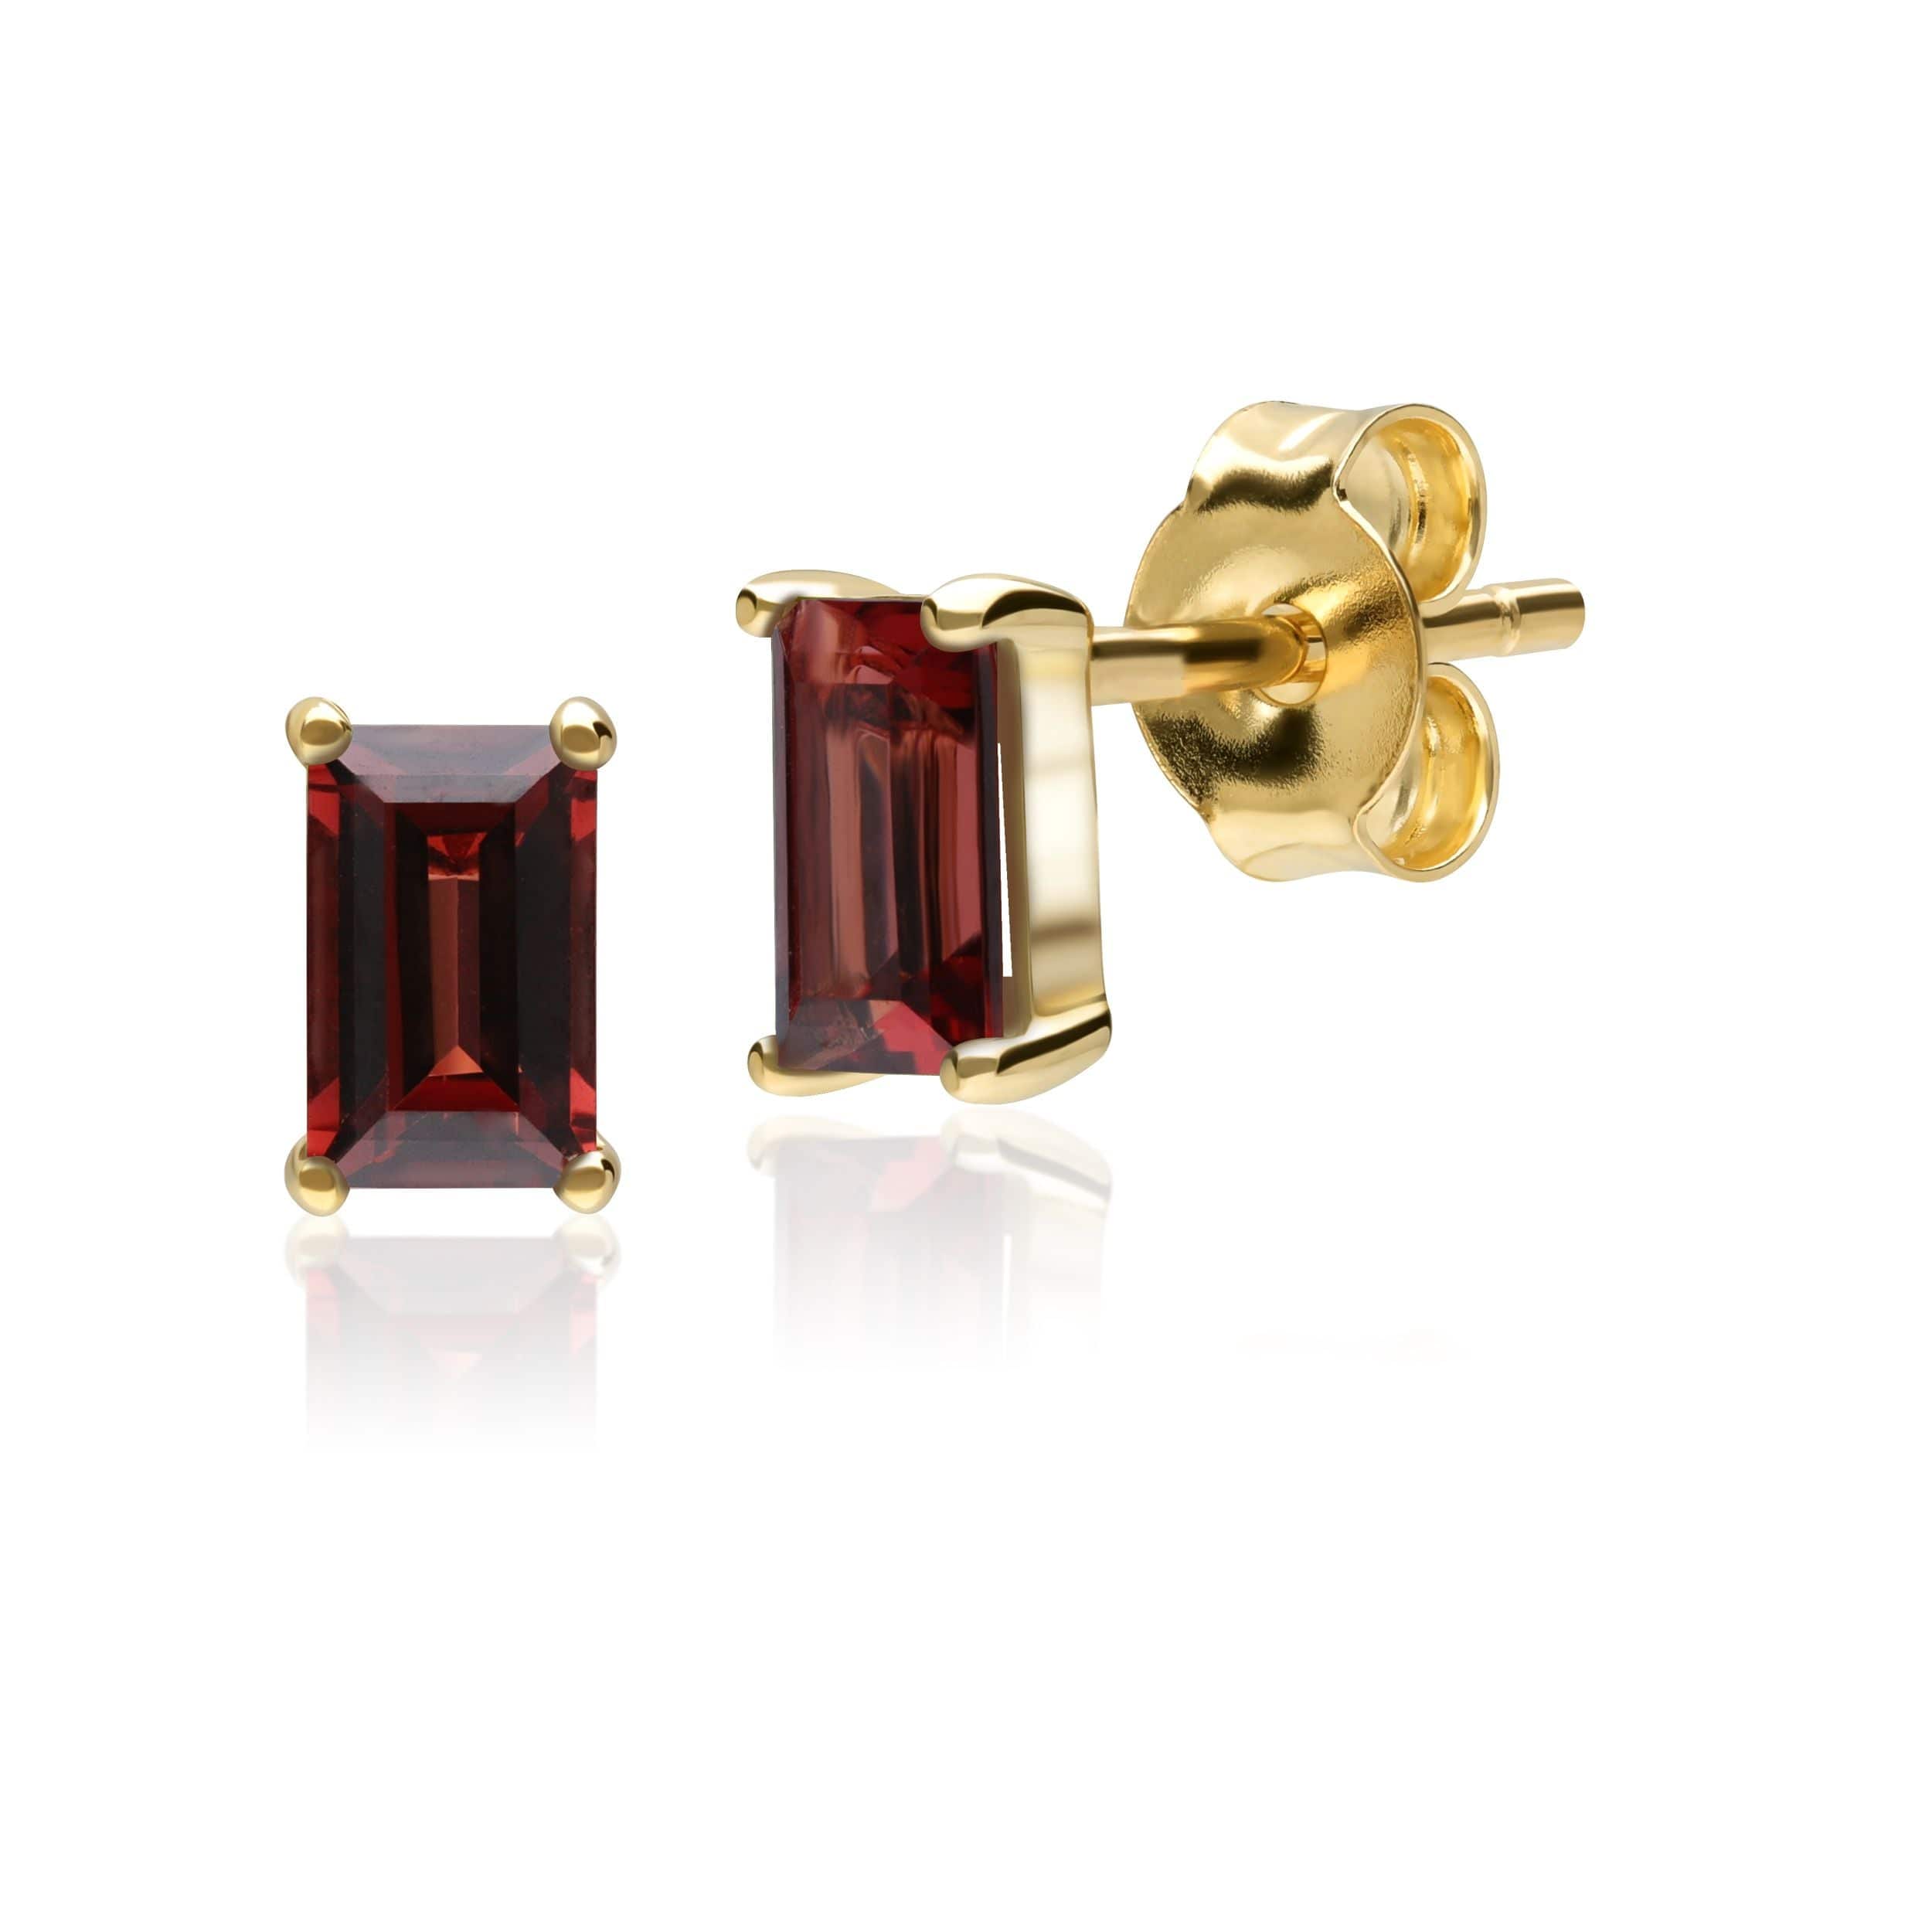 135E1524049-135P1872049 Classic Garnet Baguette Stud Earrings & Necklace Set in 9ct Yellow Gold 3